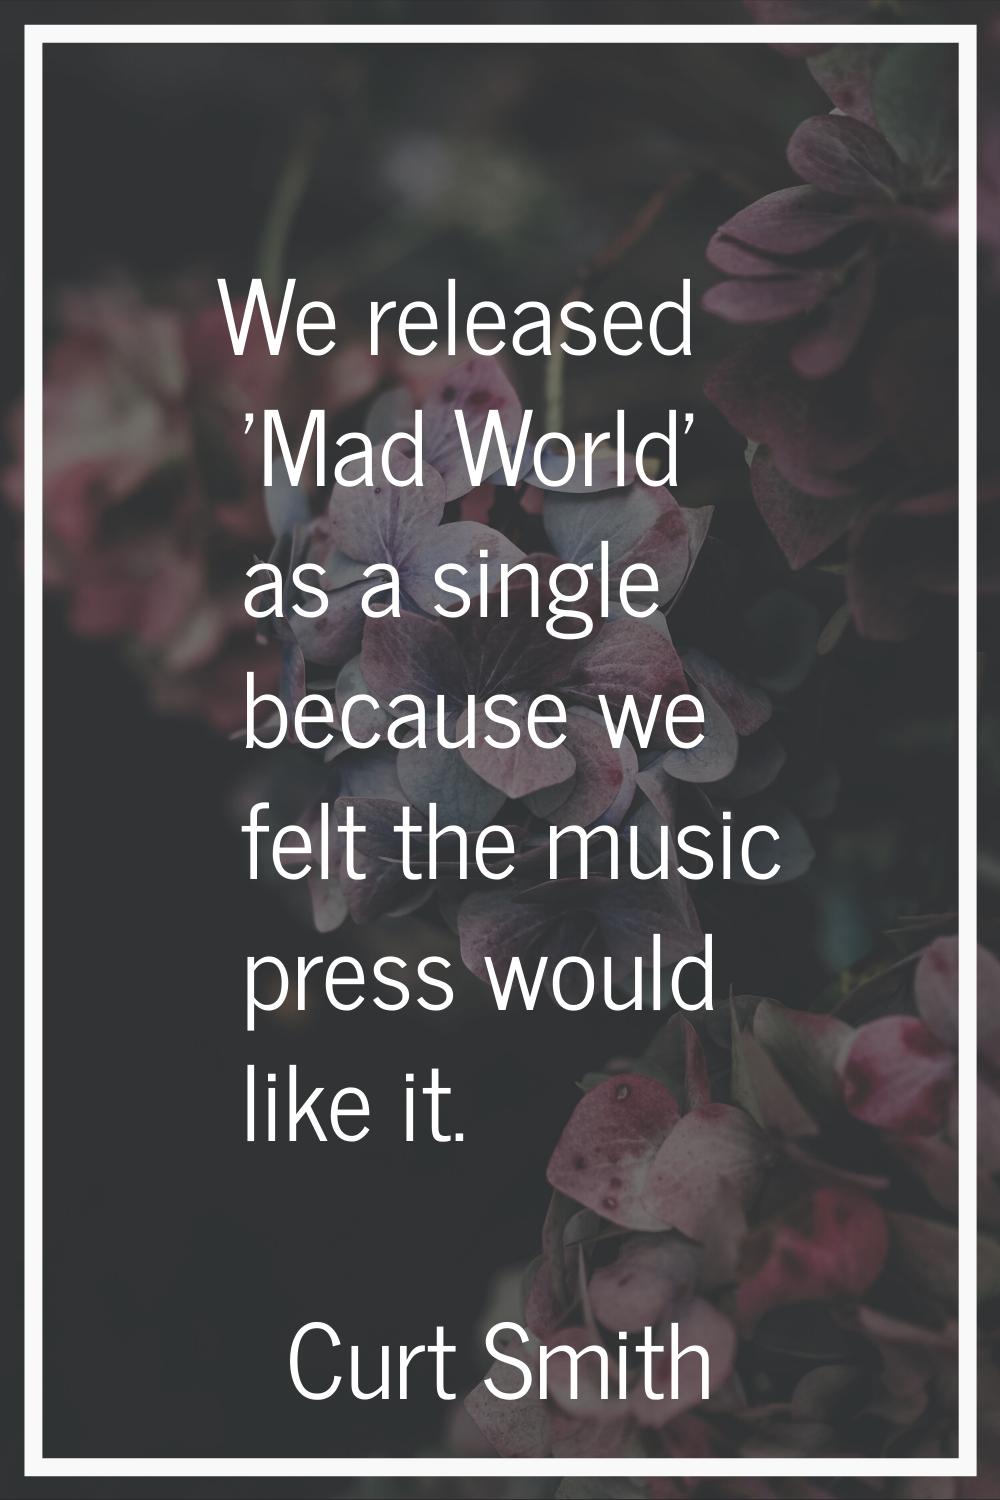 We released 'Mad World' as a single because we felt the music press would like it.